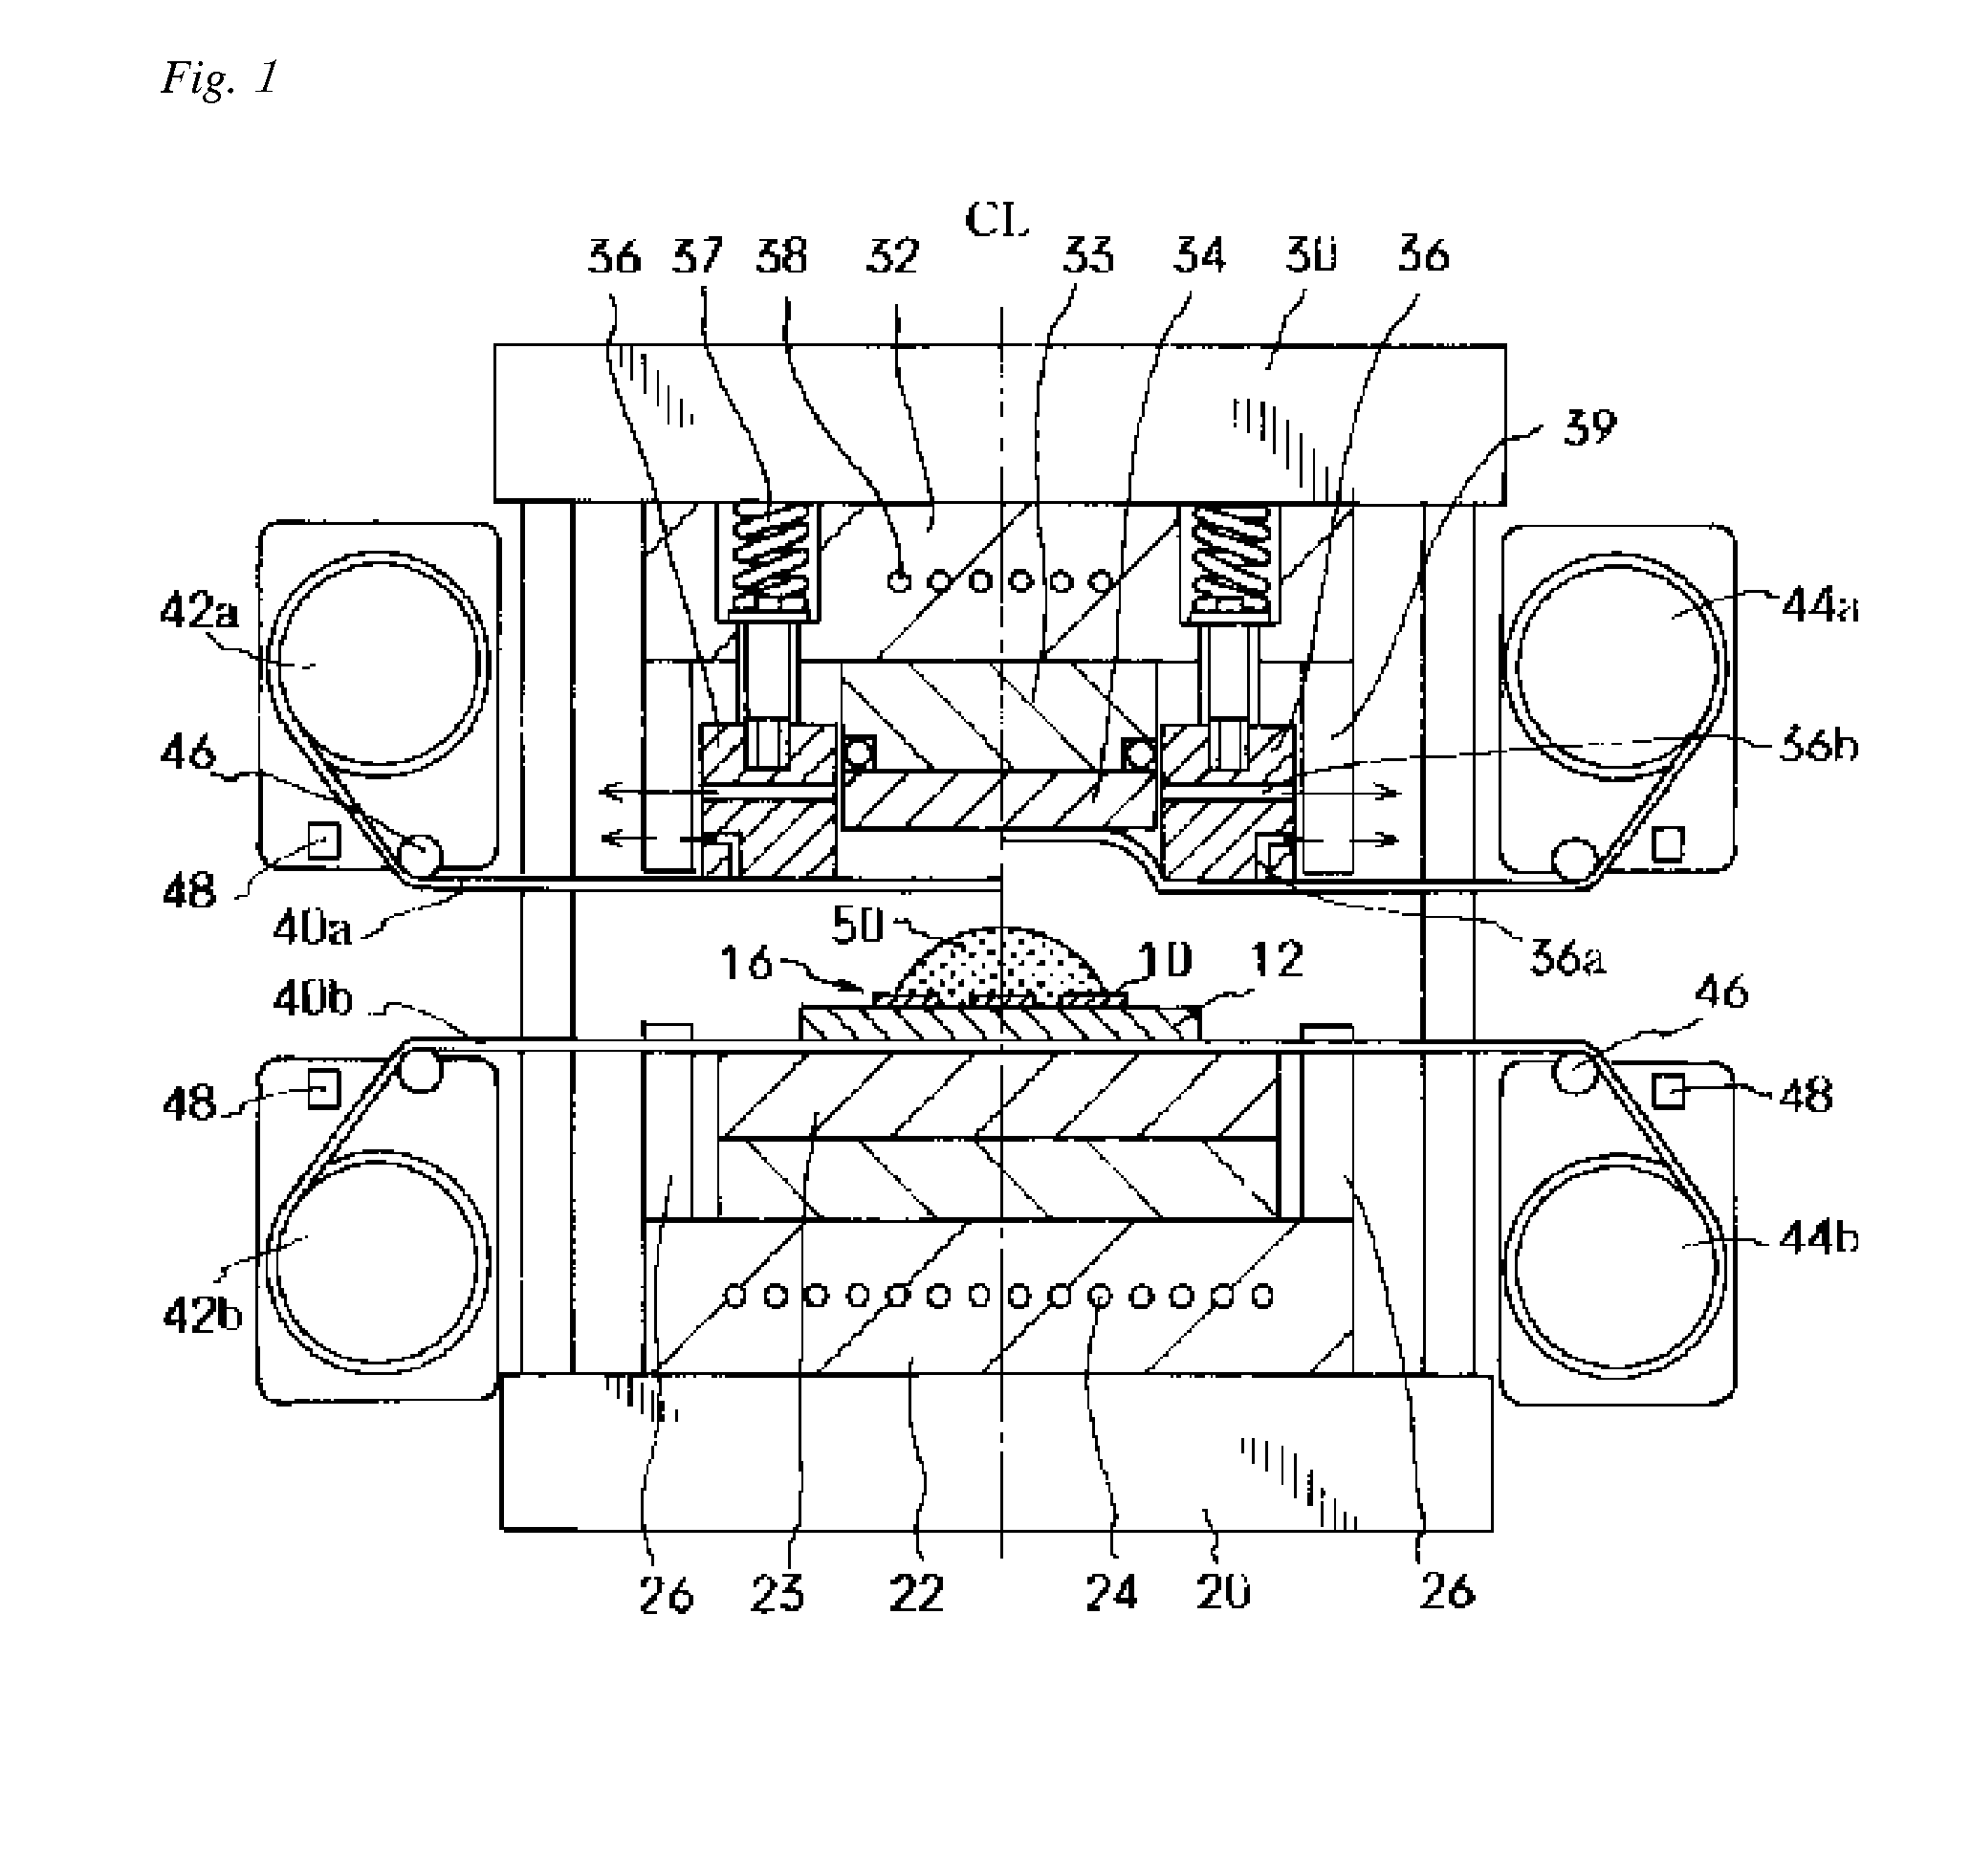 Method Of Manufacturing A Semiconductor Device And A Semiconductor Device Produced Thereby